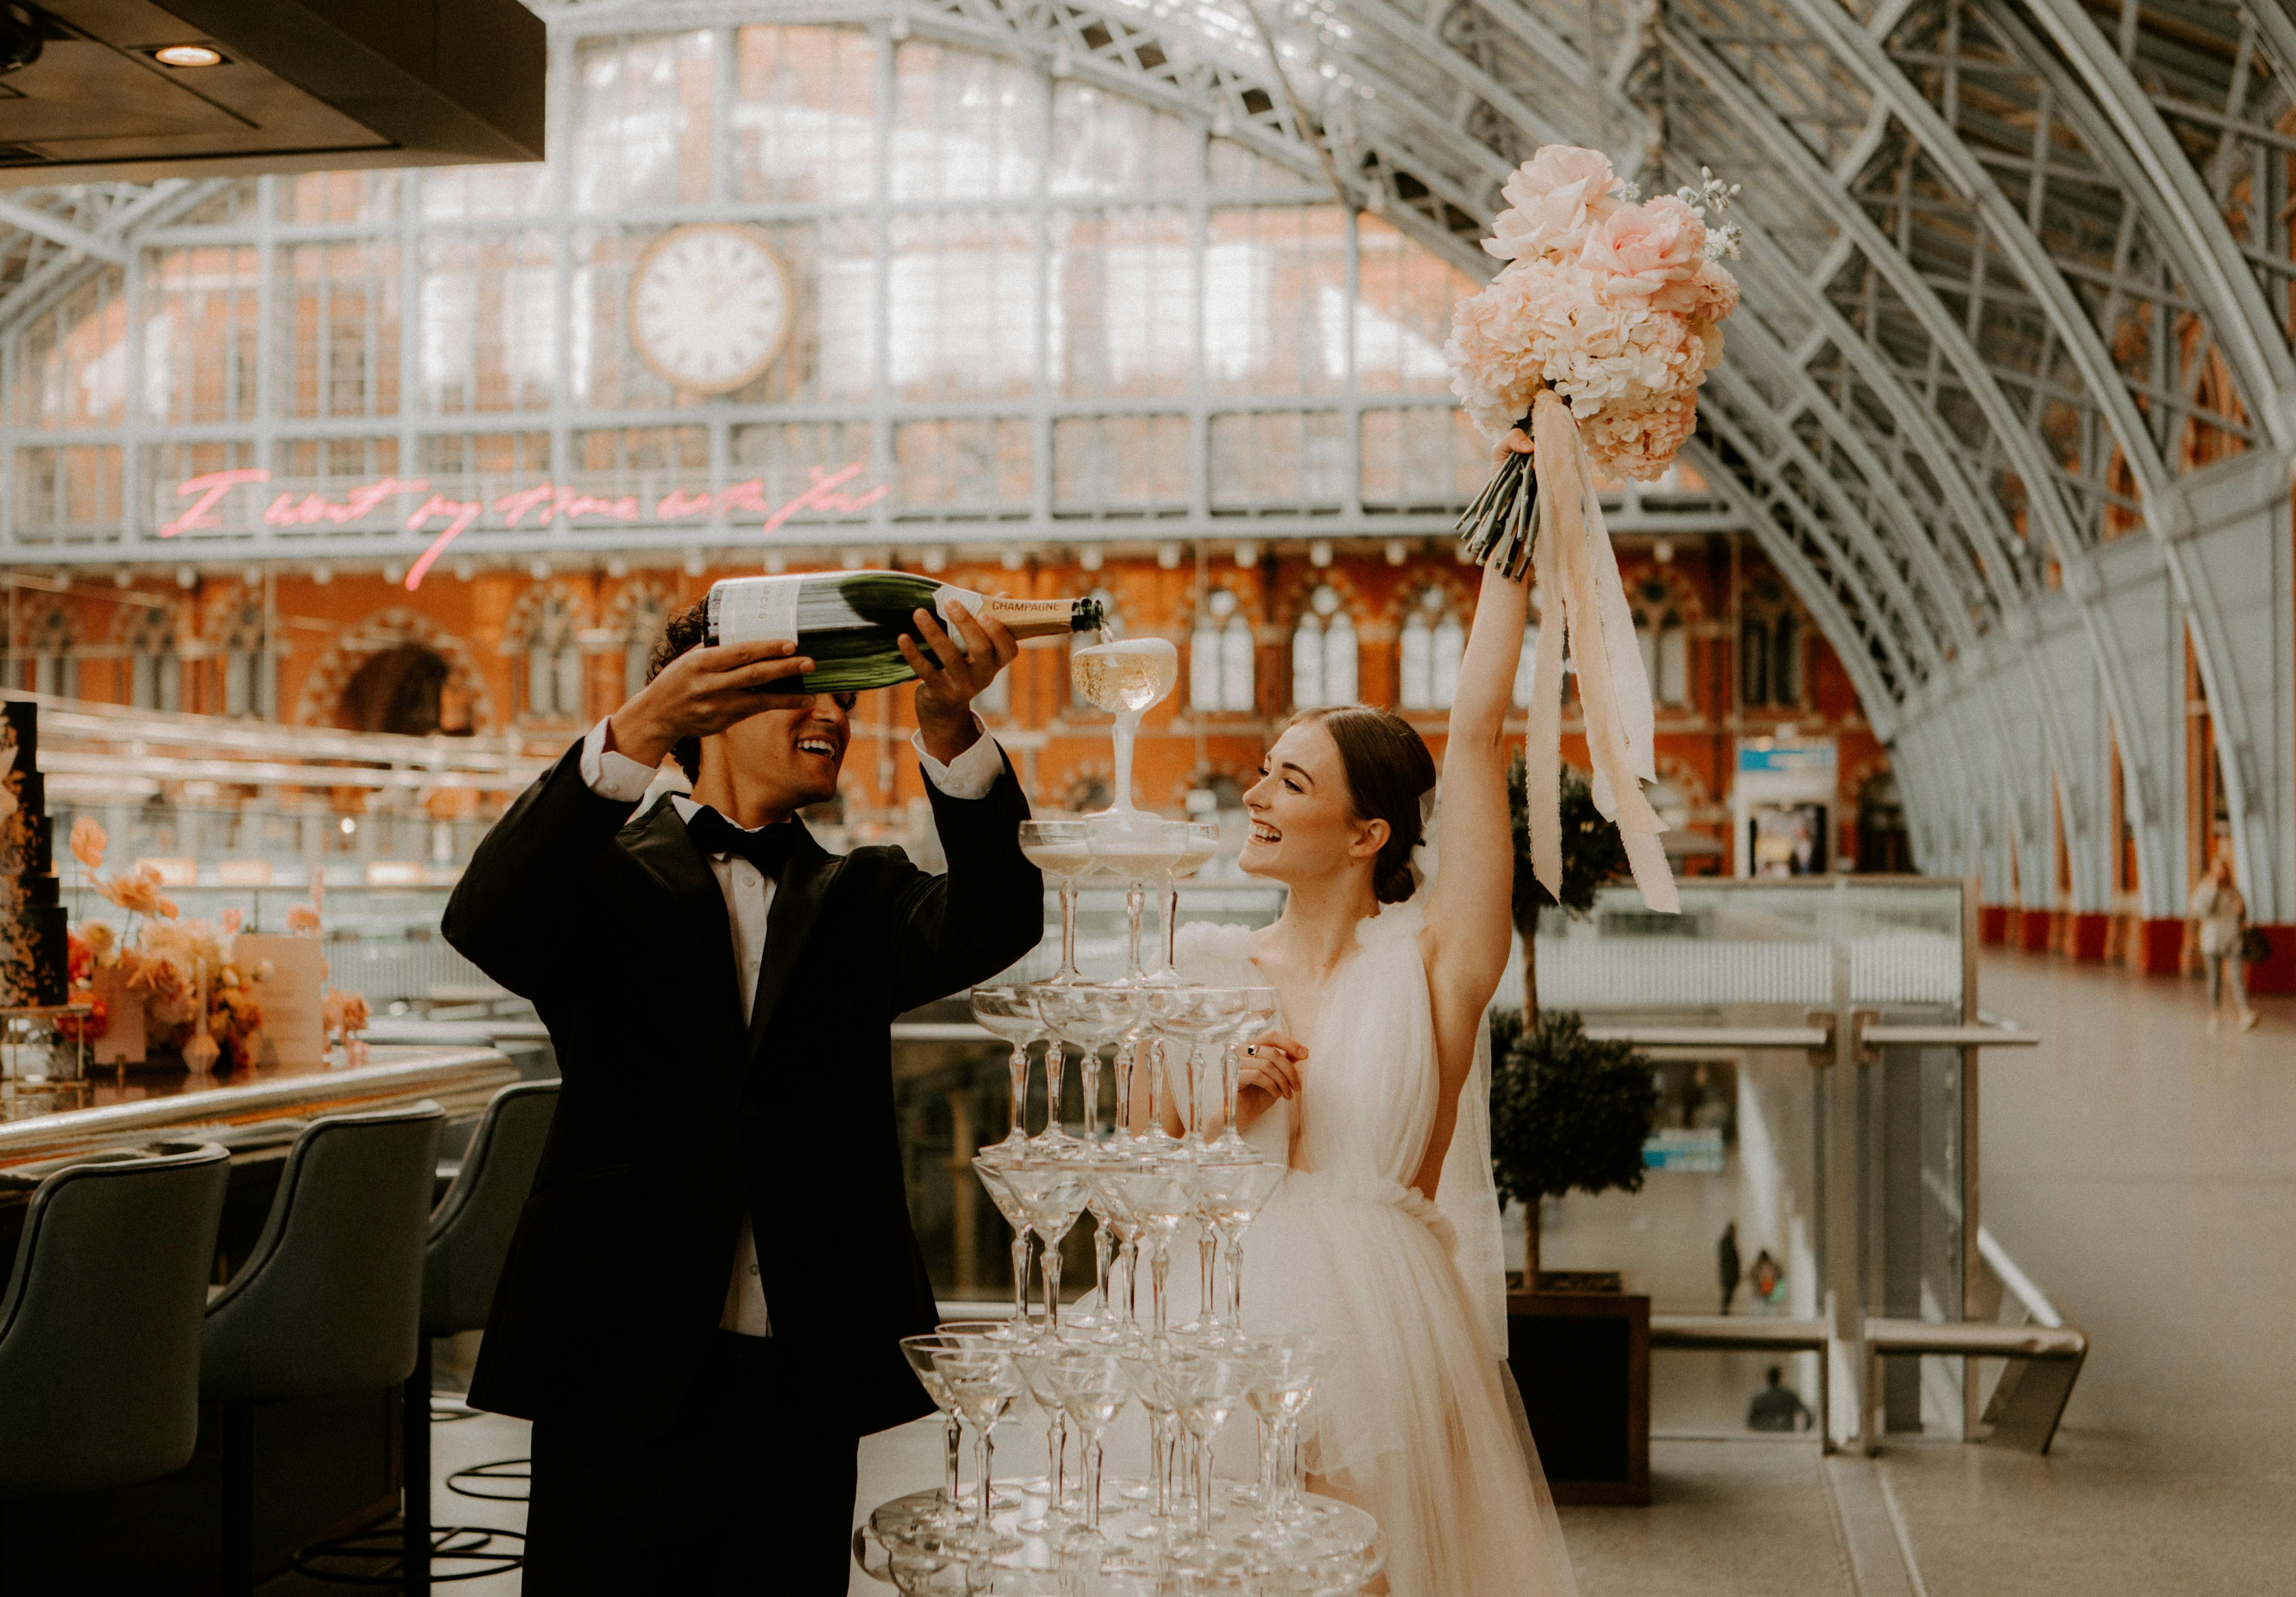 Weddings - St Pancras Brasserie and Champagne Bar by Searcys 